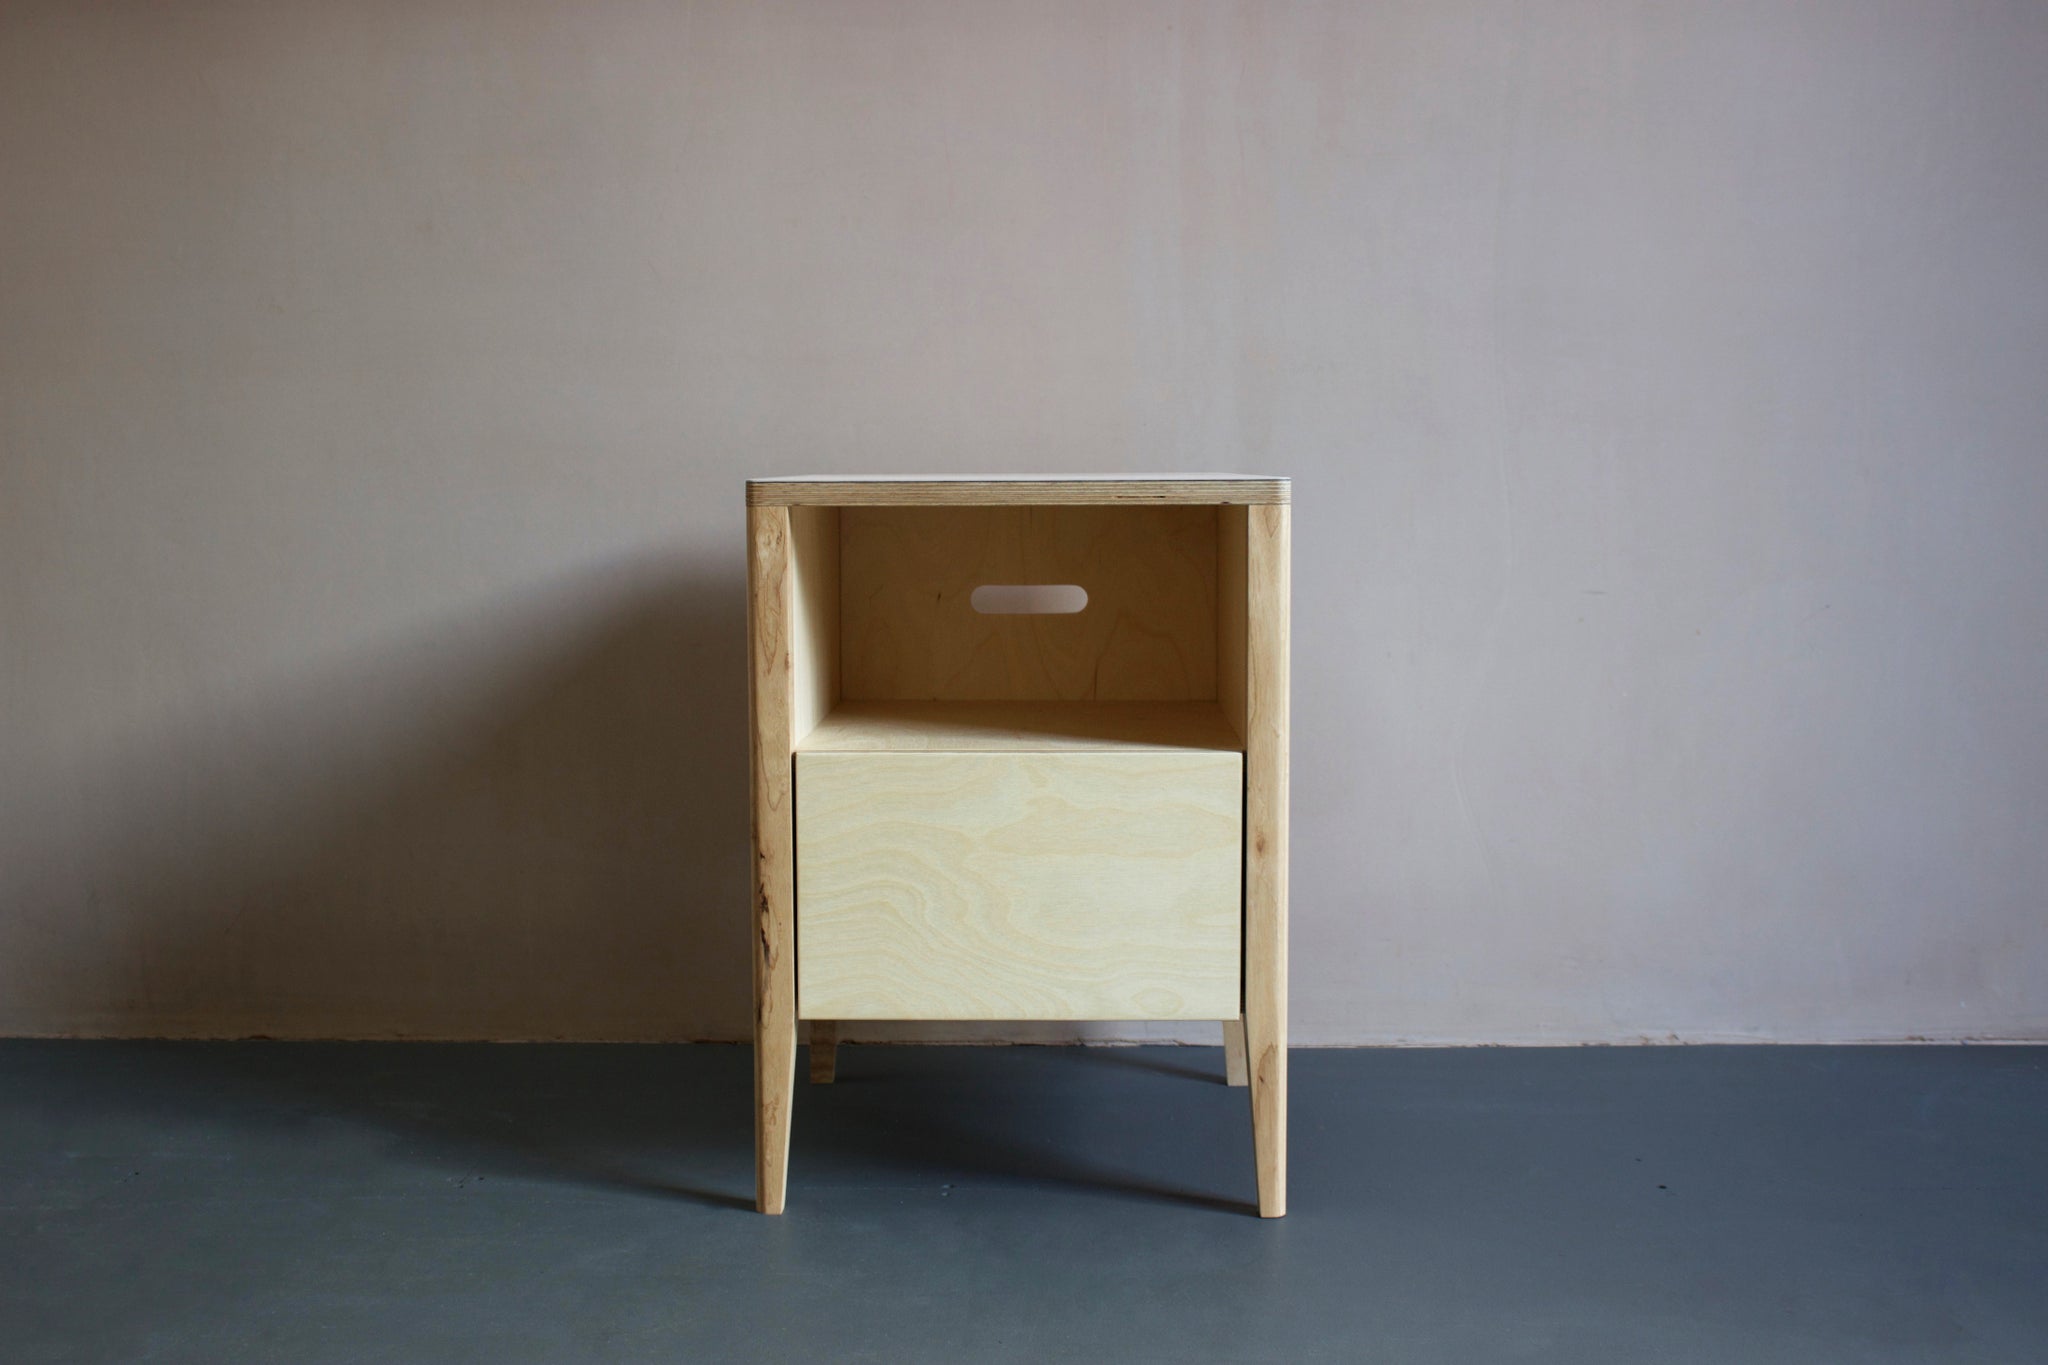 The Huxley bedside table in birch plywood, featuring solid ash legs and Forbo linoleum plywood top. Designed and made by Jon Grant London in Leyton, East London.